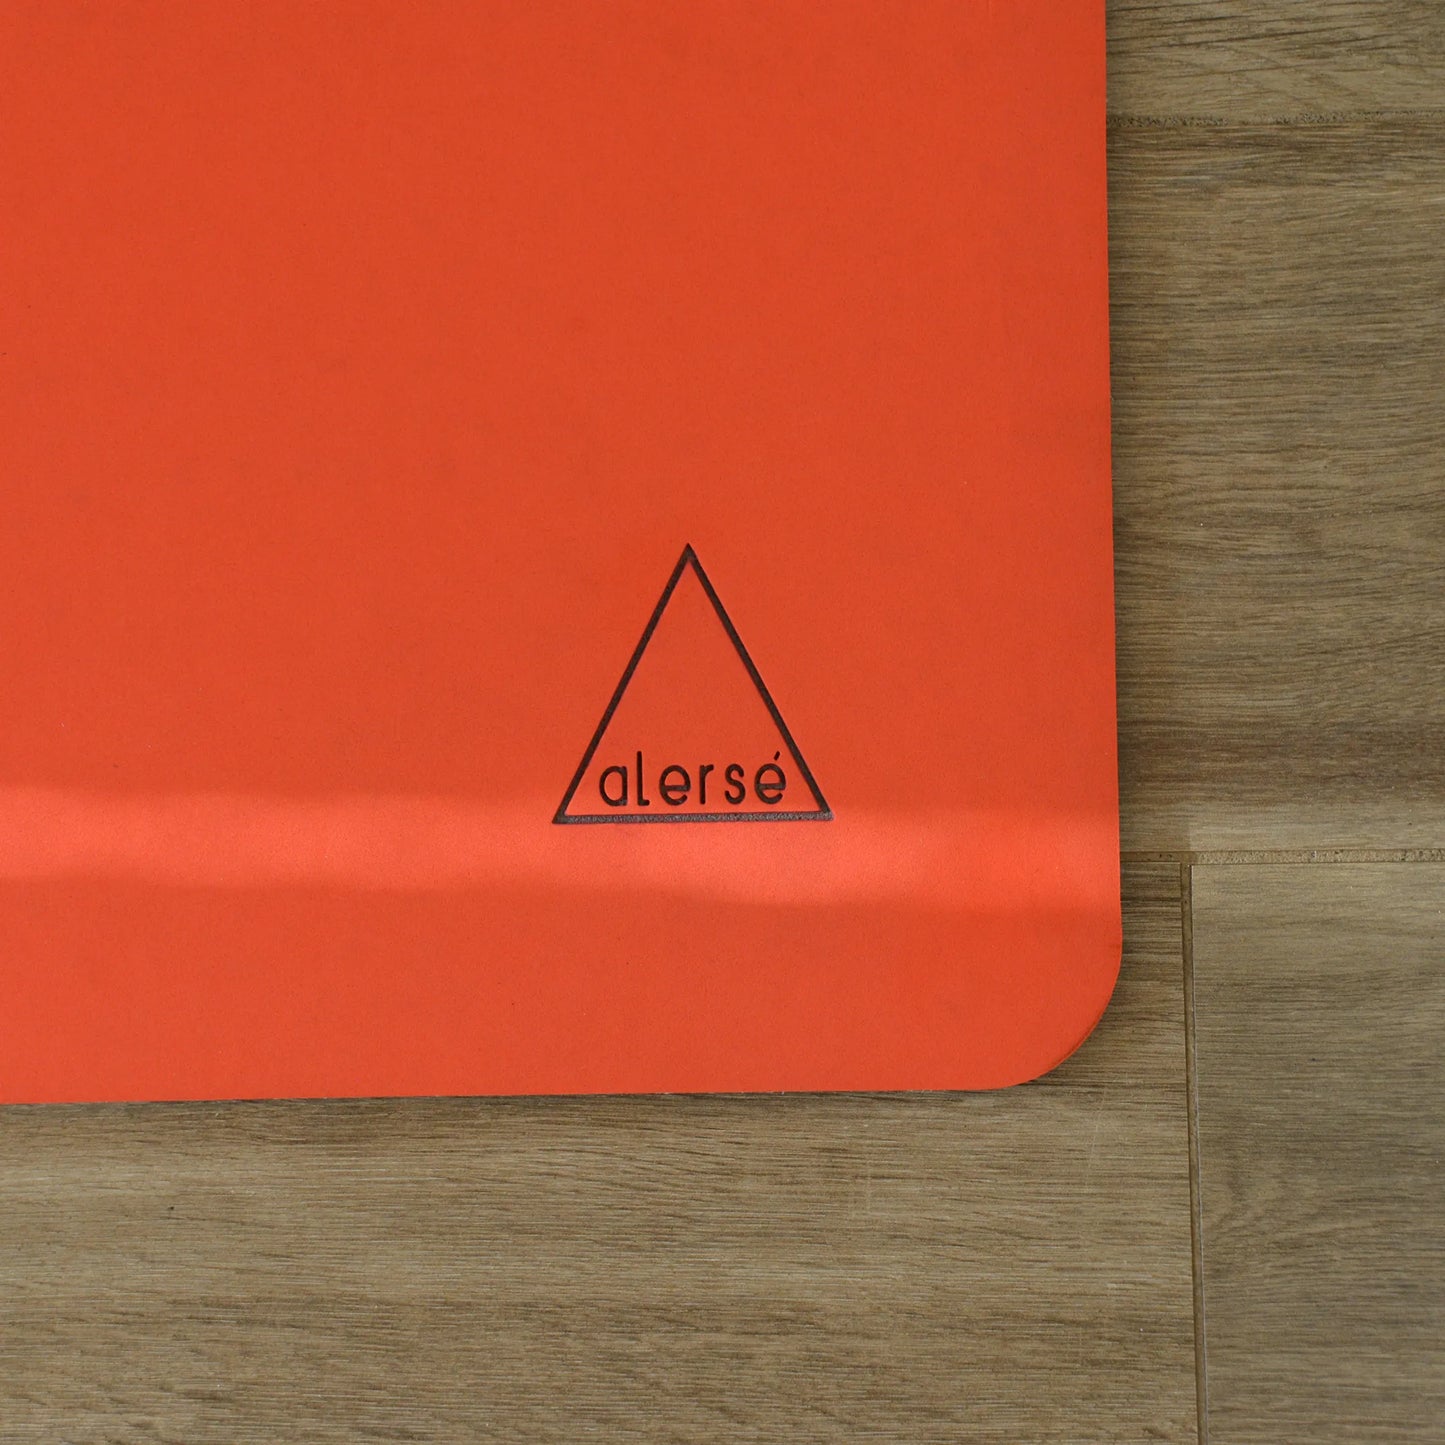 Corner of a red yoga mat with a Alerse logo on it.